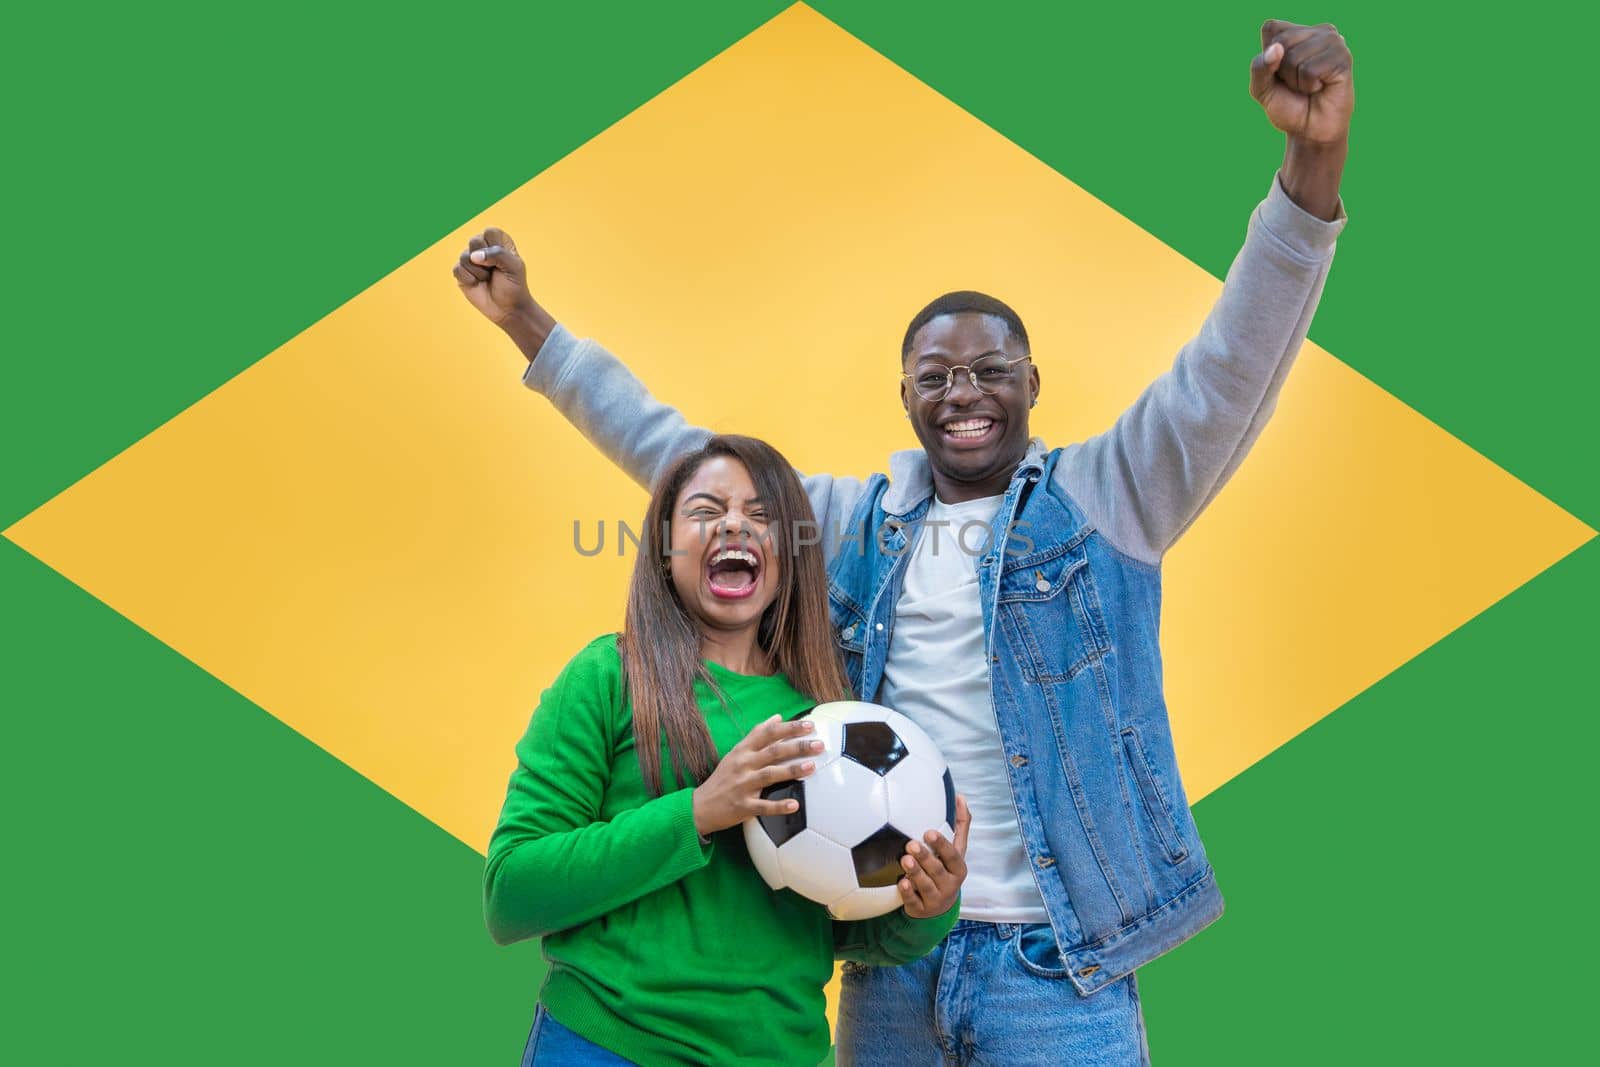 Brazilian fans couple happy celebrating football or soccer game on yellow and green background by PaulCarr